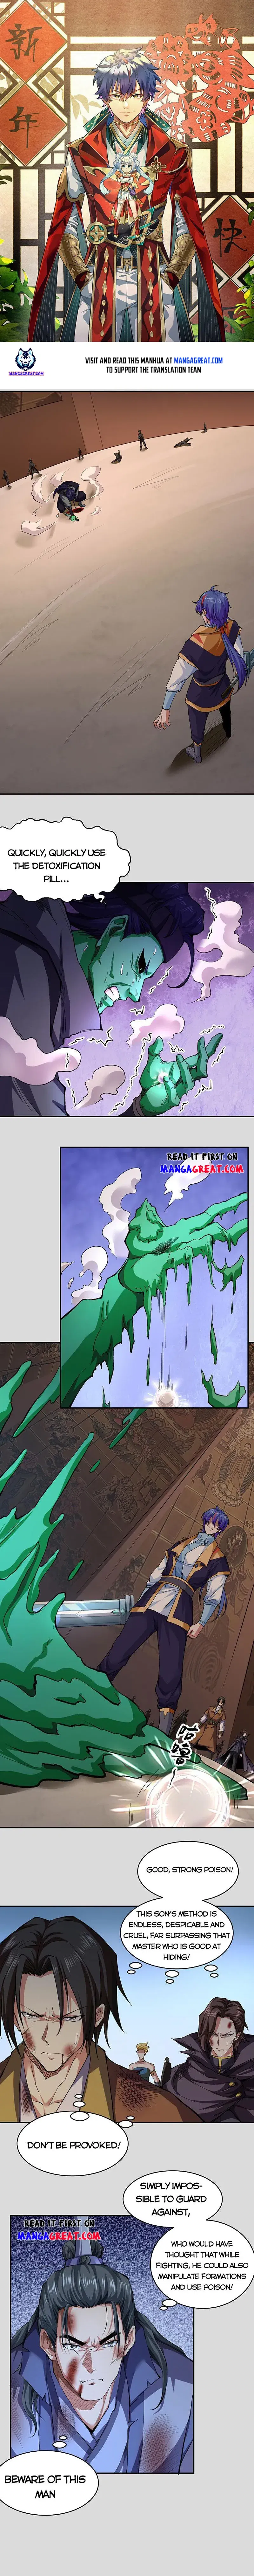 Martial Arts Reigns Chapter 614 page 1